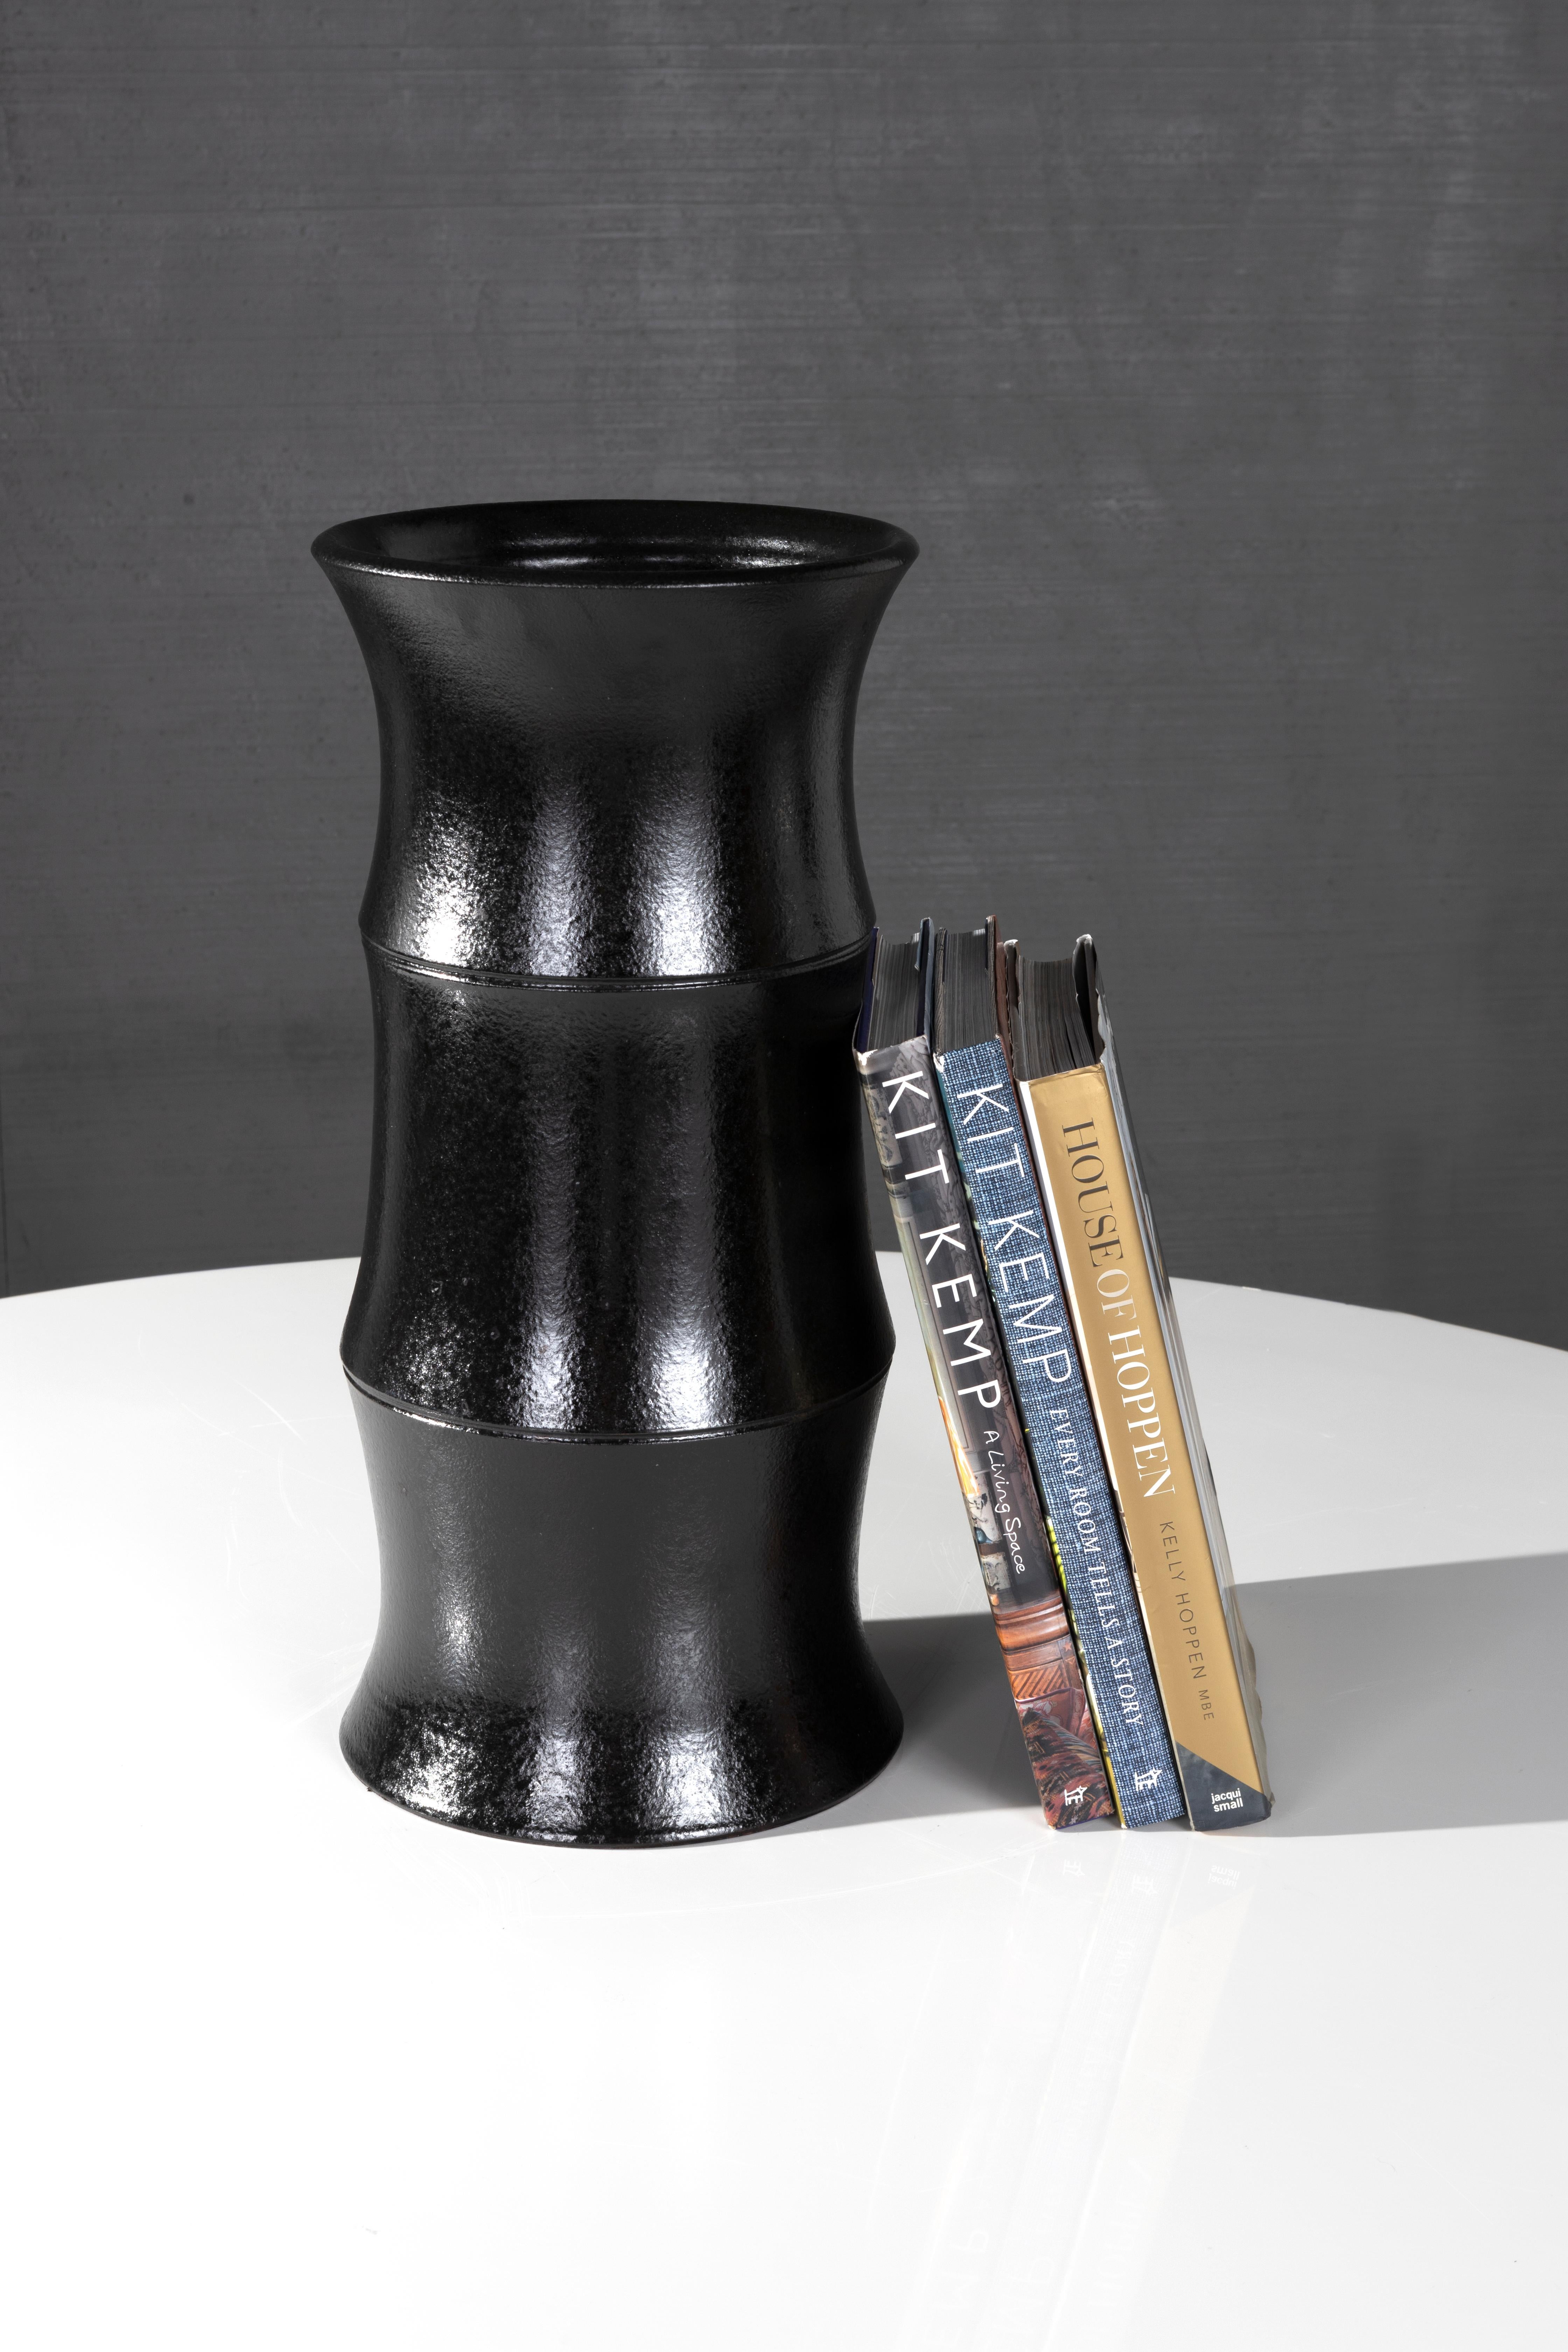 The Také Vase, the newest addition to the RENG line, Ebony glazed terracotta bamboo form vase based off the table lamp which shares its name sake.

All pieces from the RENG line are designed in Dallas, Texas by Brendan Bass. Then a small team of